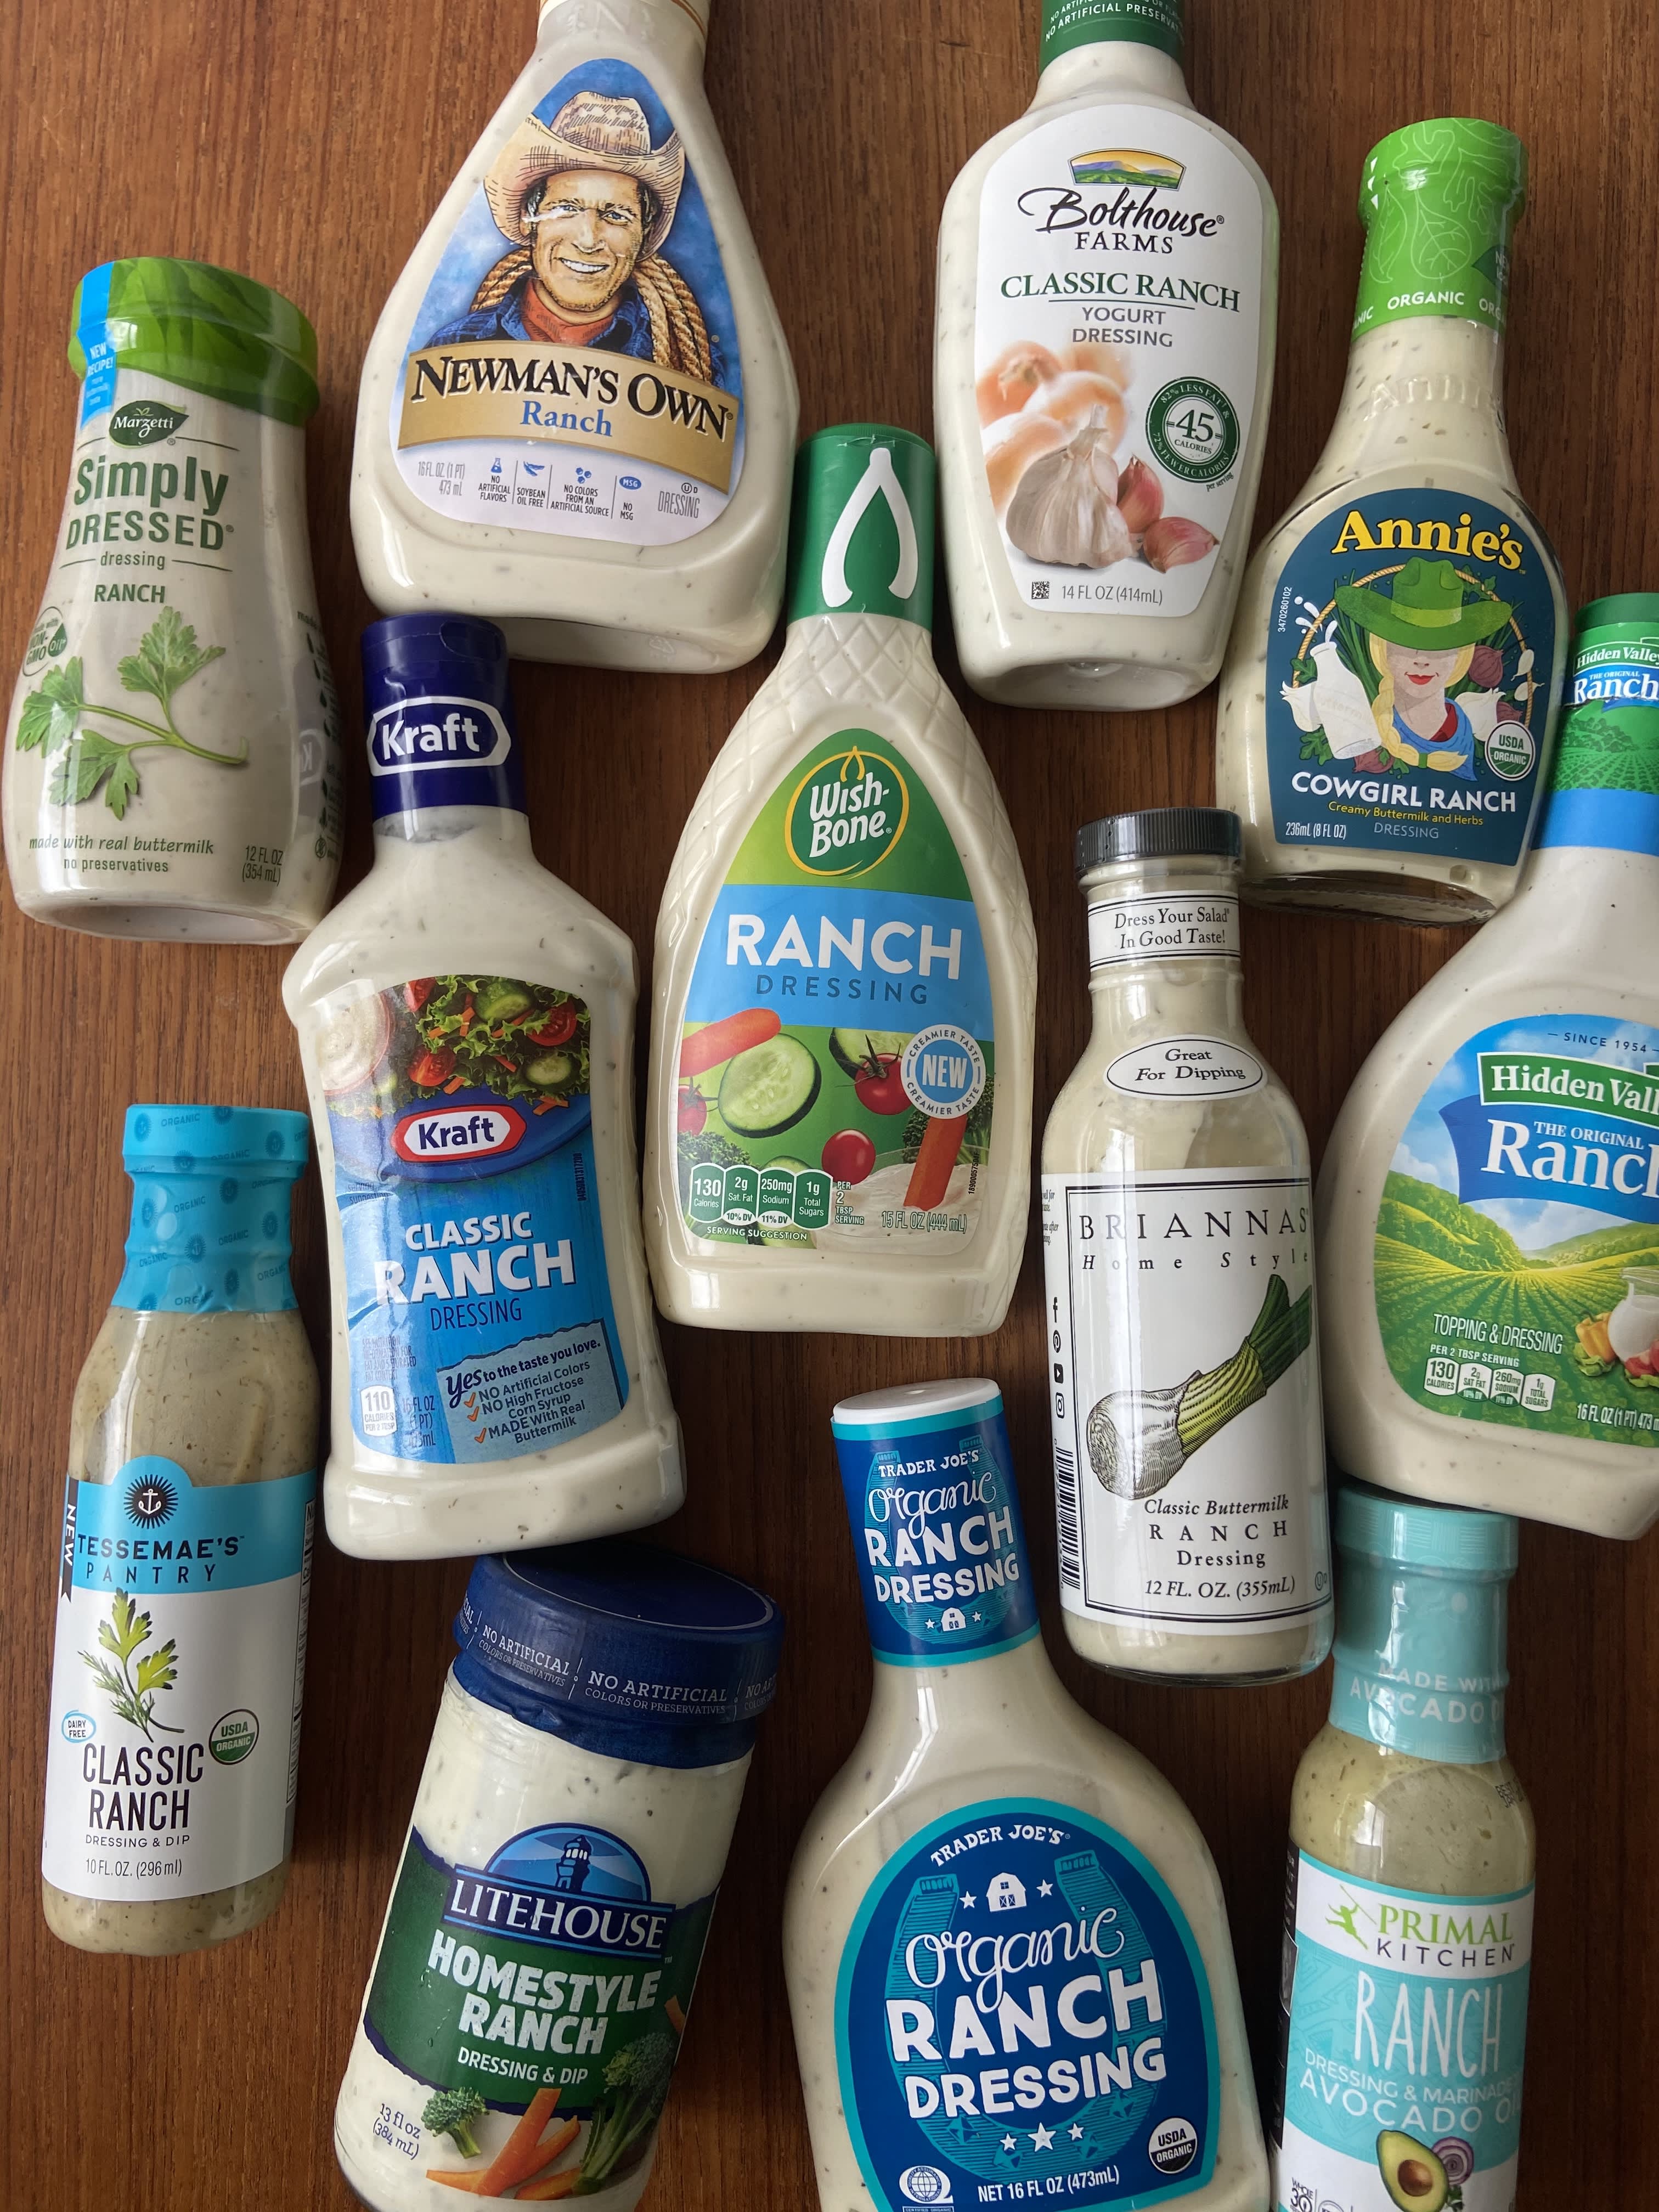 is classic gourmet ranch good?